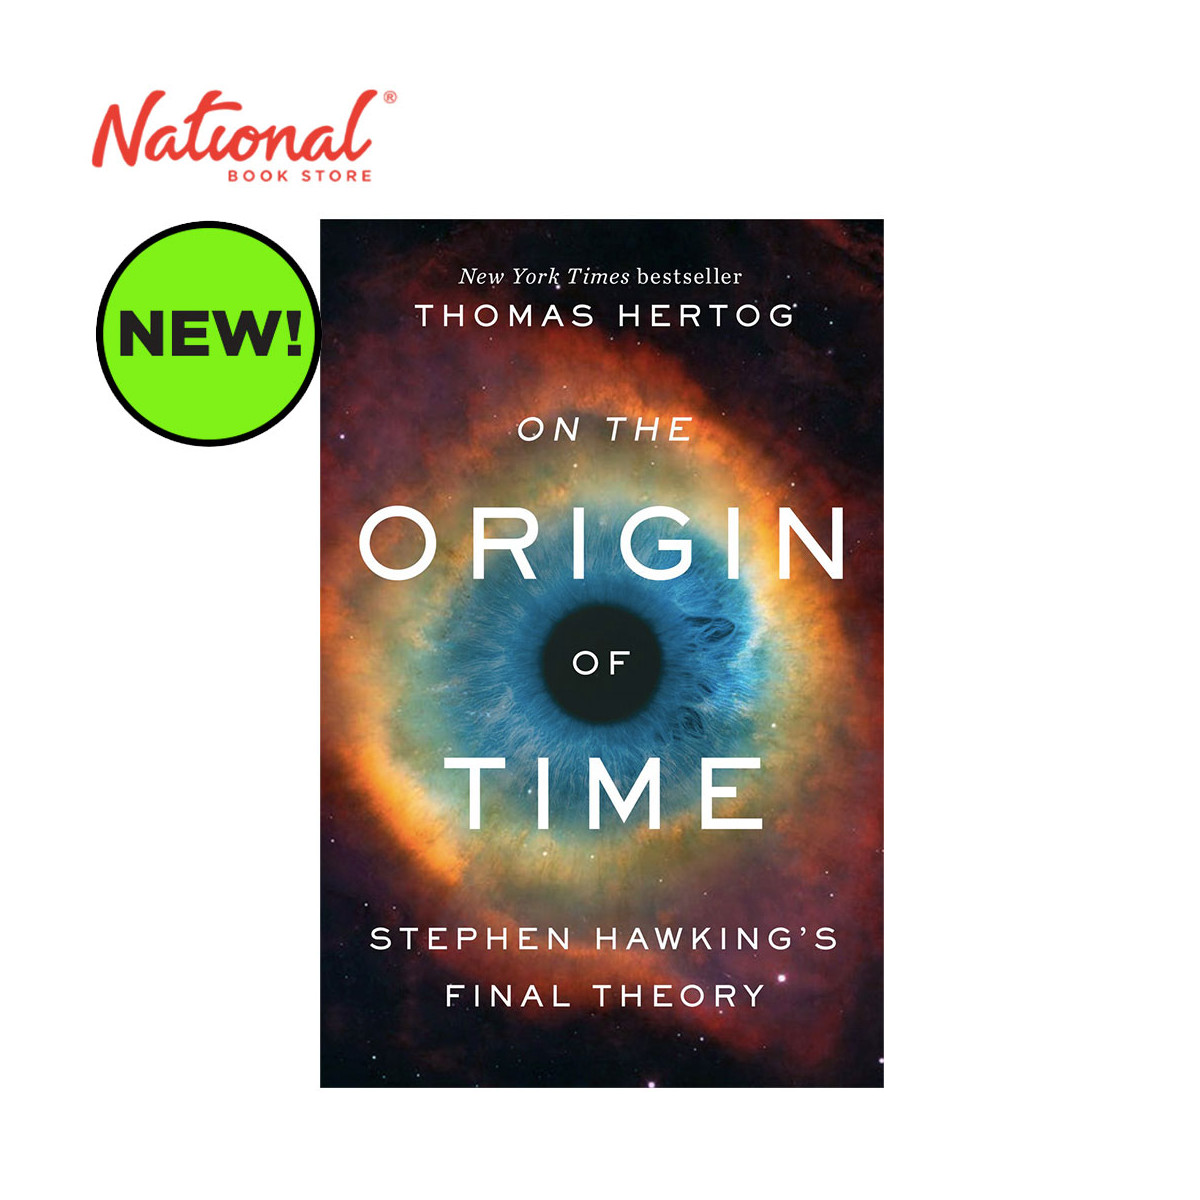 On The Origin of Time: Stephen Hawking's Final Theory by Thomas Hertog - Trade Paperback - Reference